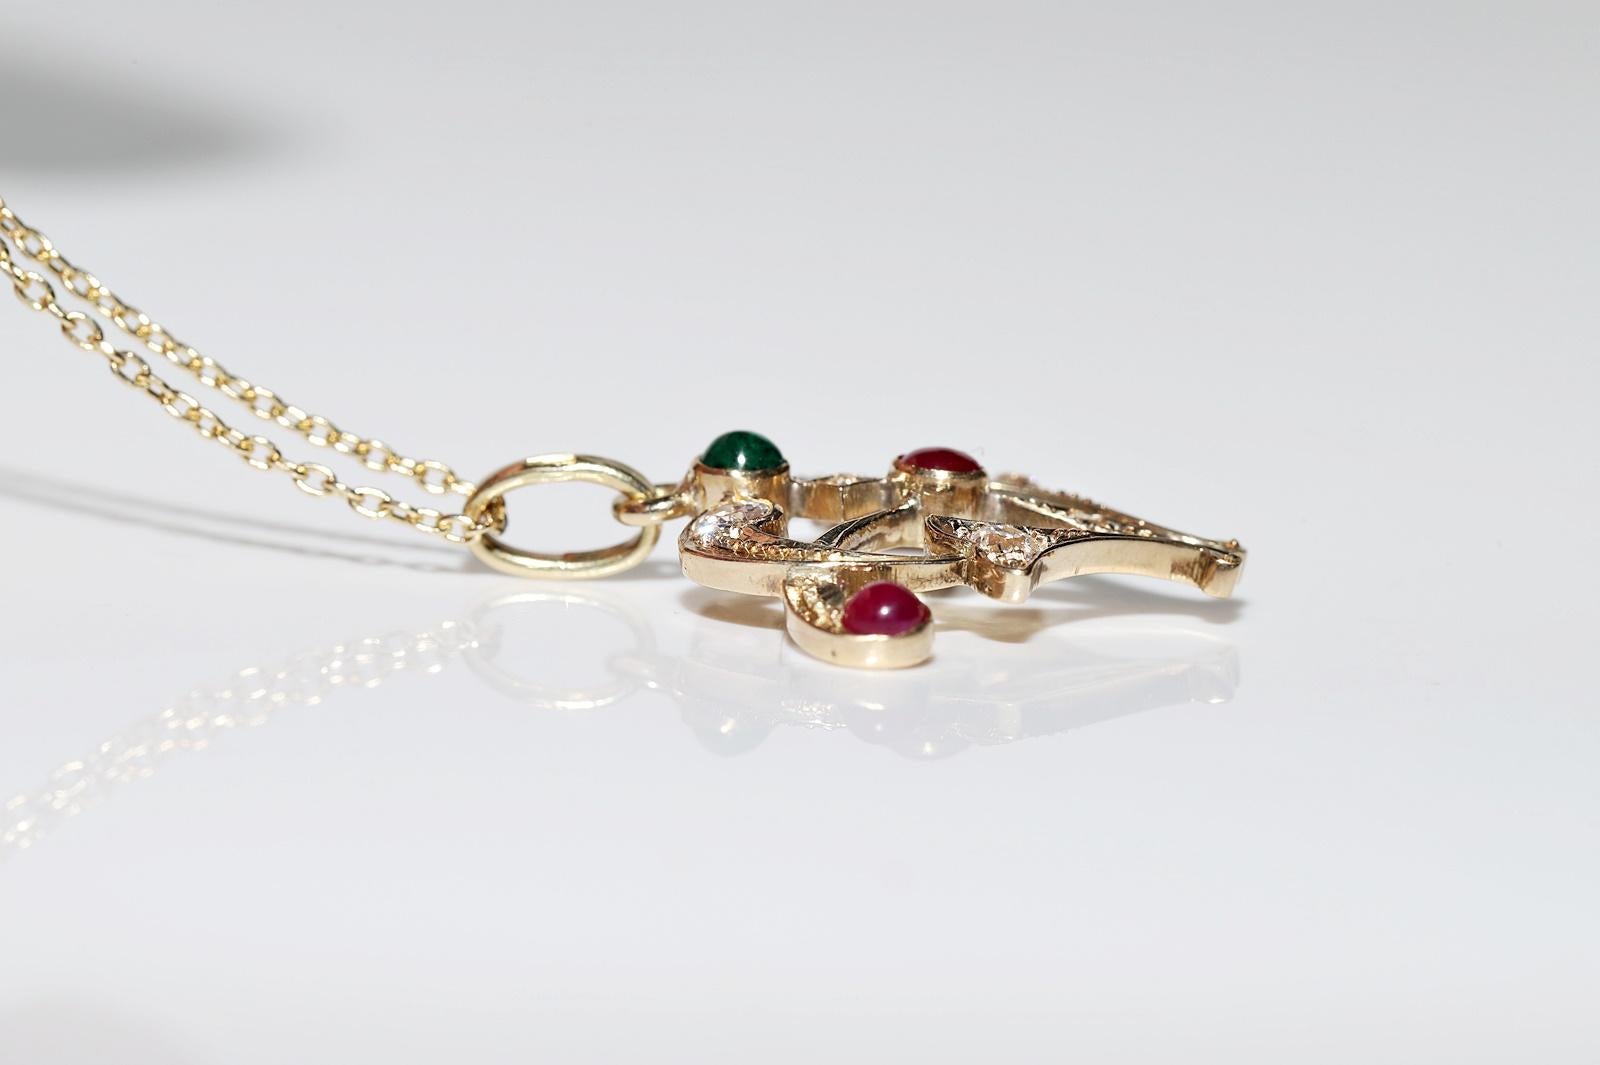 Vintage Circa 1980s 14k Gold Natural Diamond And Emerald Ruby Pendant Necklace For Sale 5